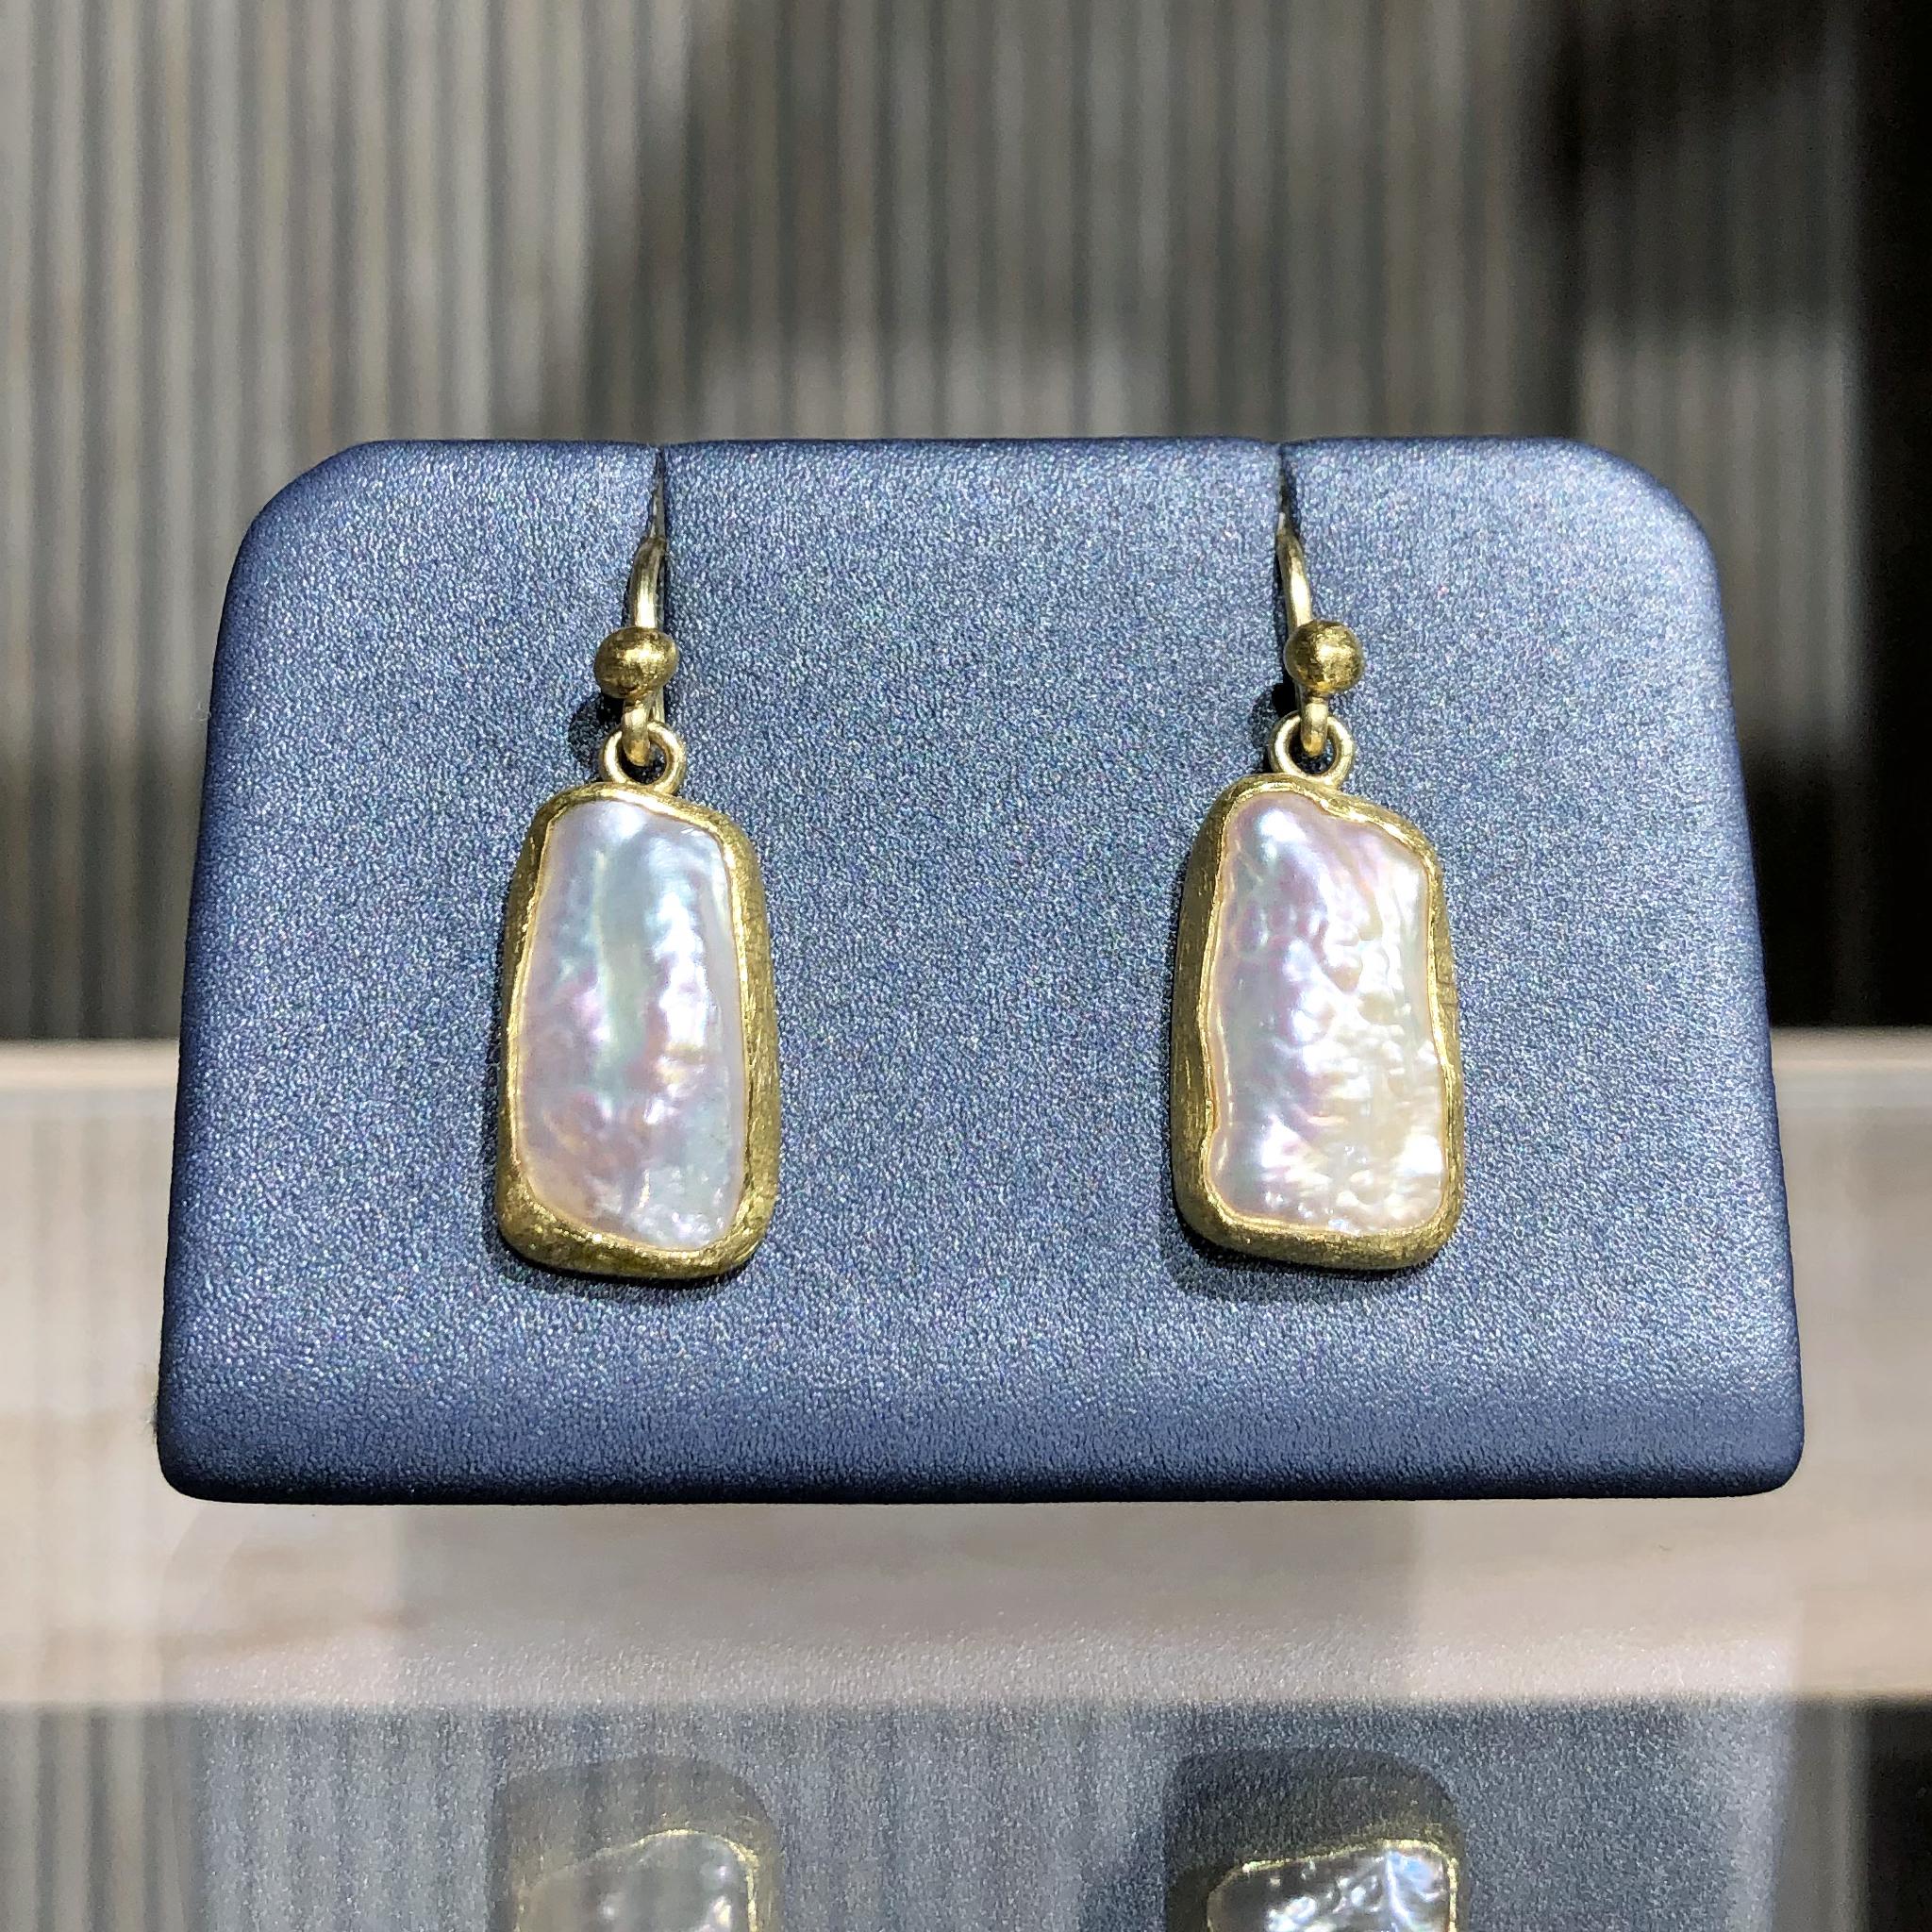 One of a Kind Dangle Drop Earrings handcrafted by jewelry maker Petra Class featuring a stunning pair of iridescent freshwater pearls bezel-set in signature-finished 22k yellow gold and attached to 18k yellow gold ear wires. Stamped and hallmarked